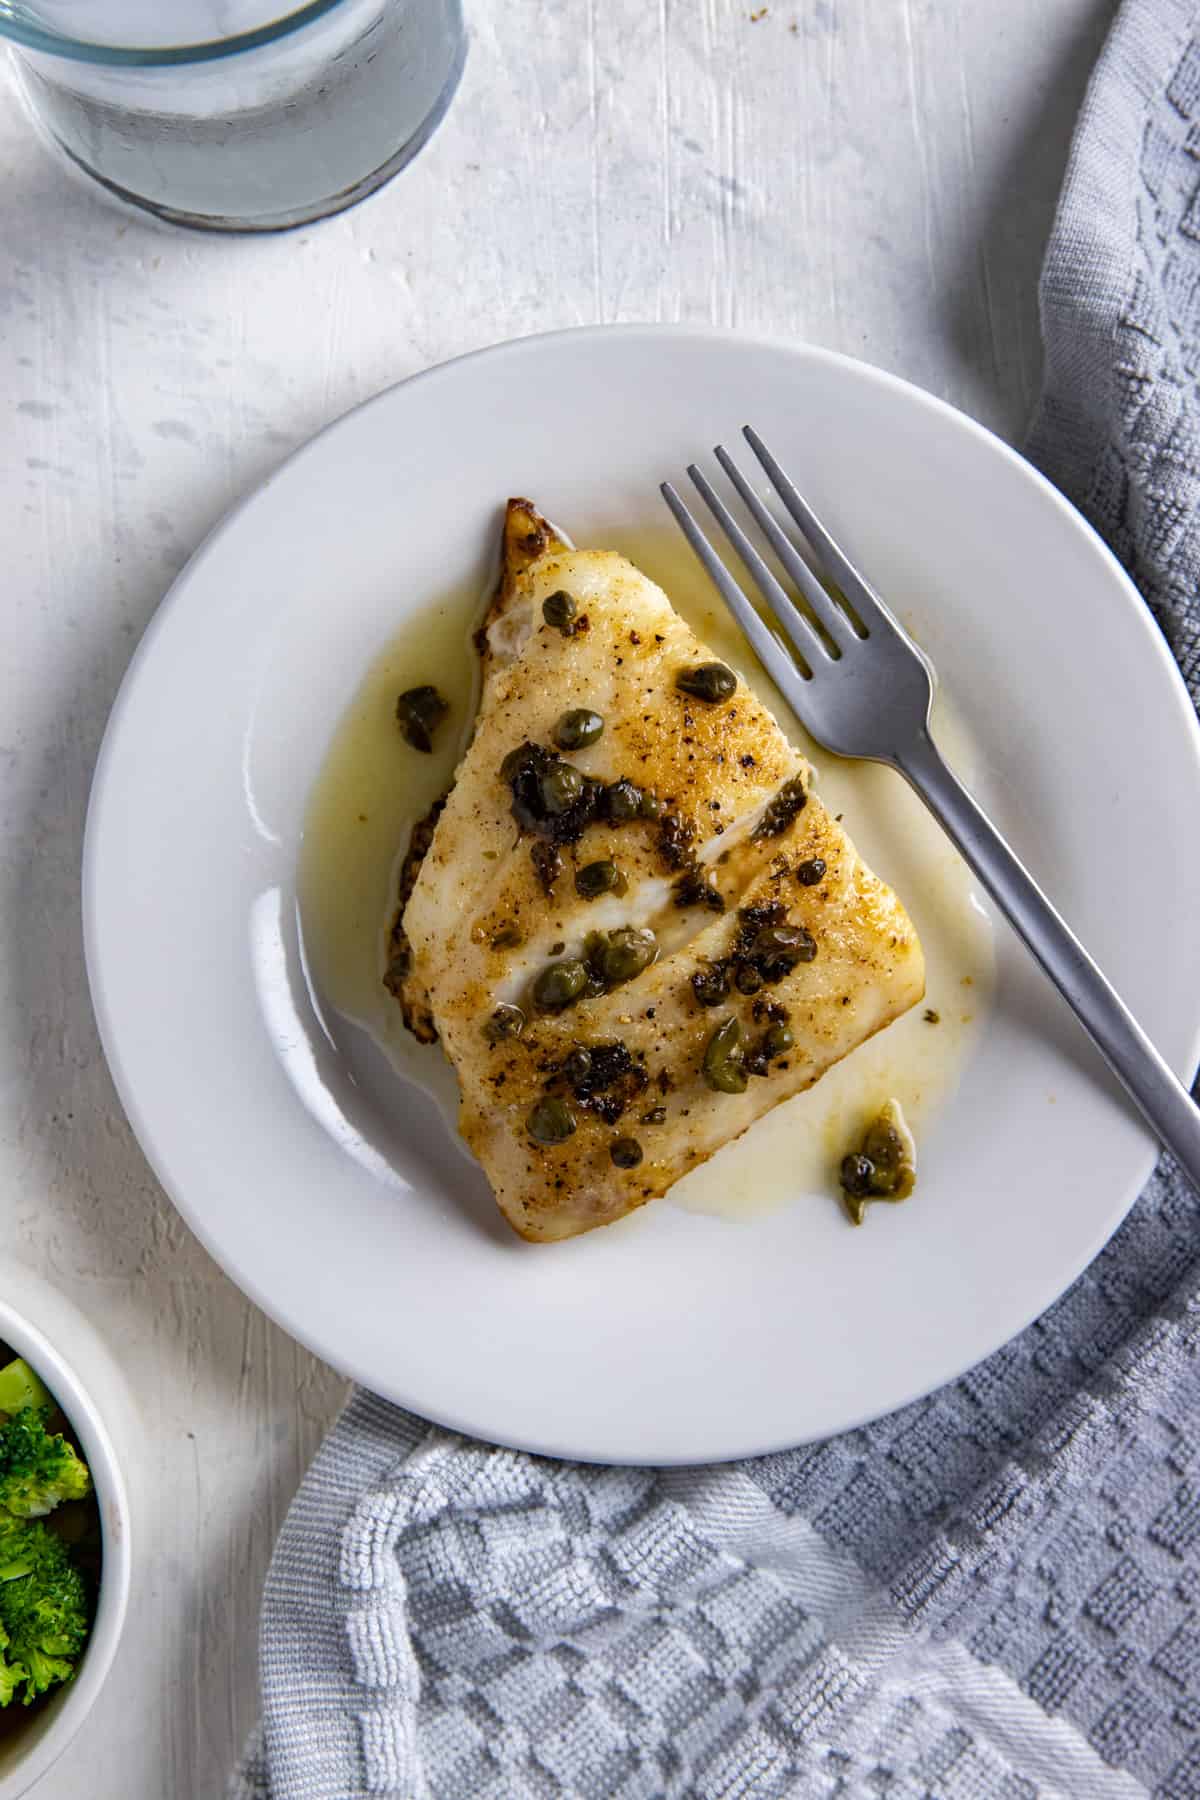 baked snapper topped with capers on white plate with fork